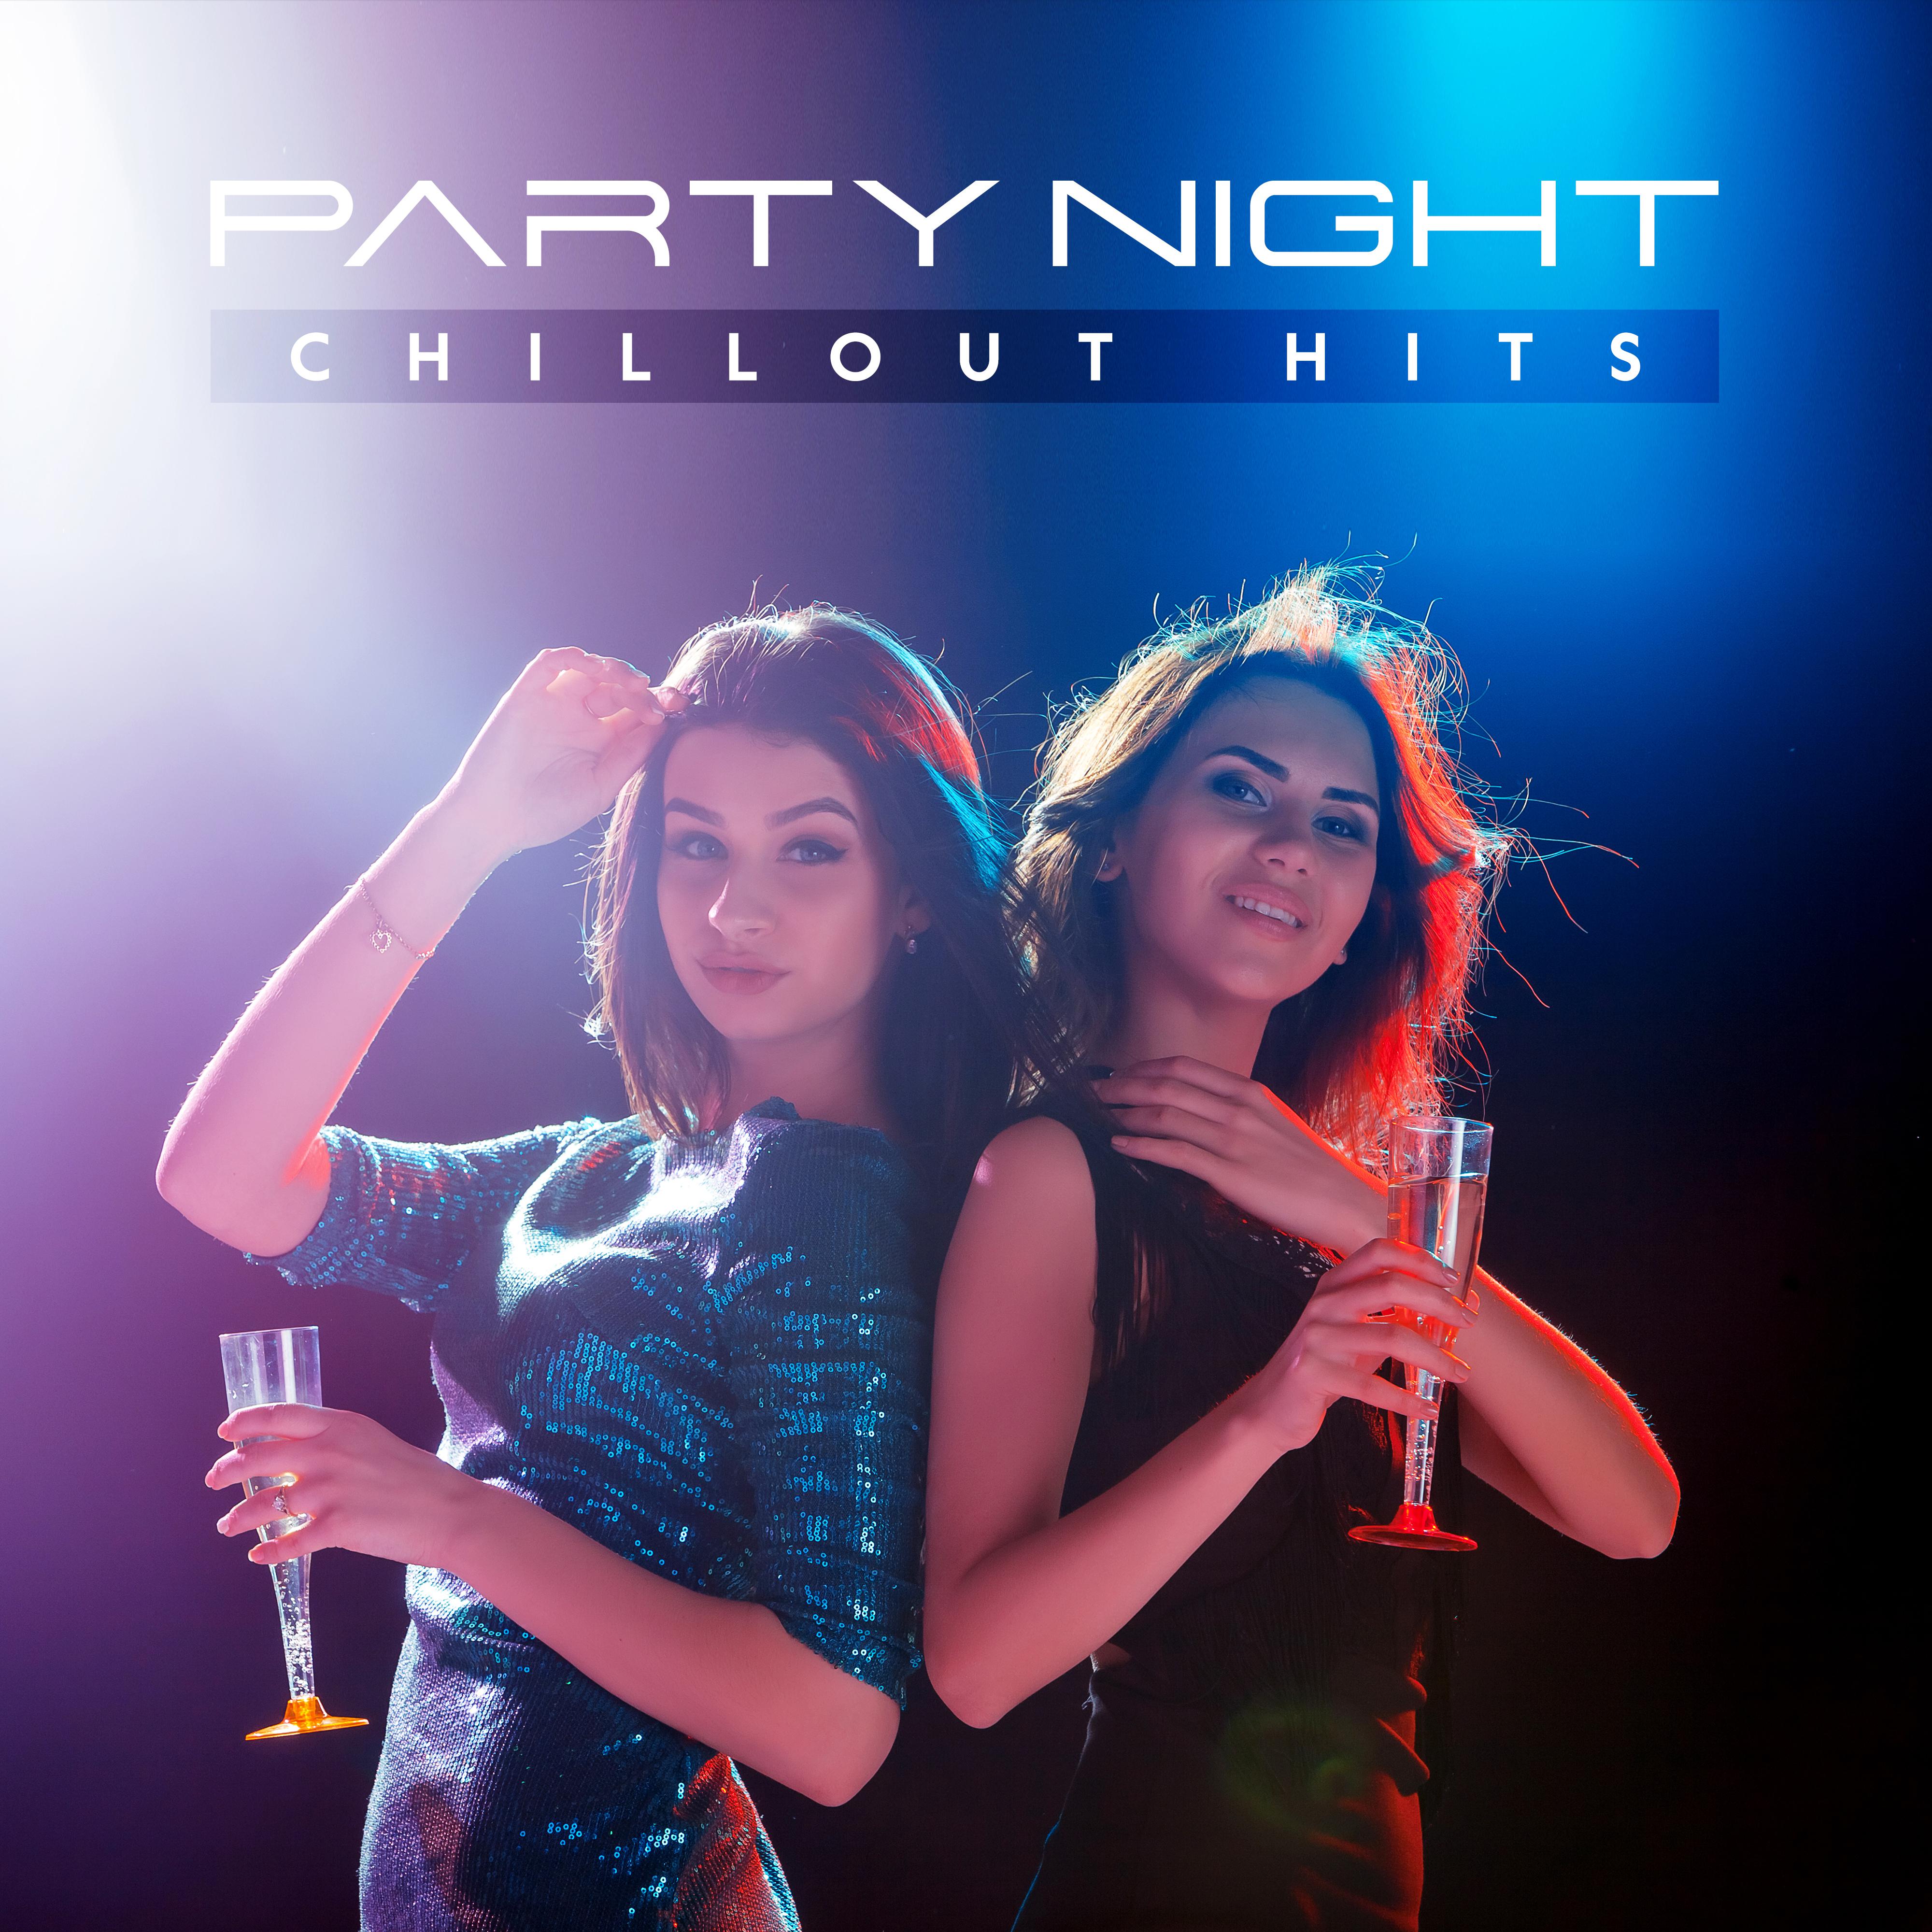 Party Night Chillout Hits  Compilation of Top Chill Out Electronic Slow Music for Night Party in the Club or at Home, Deep Beats with Electro Melodies, Hot Summer Holiday Dance Party